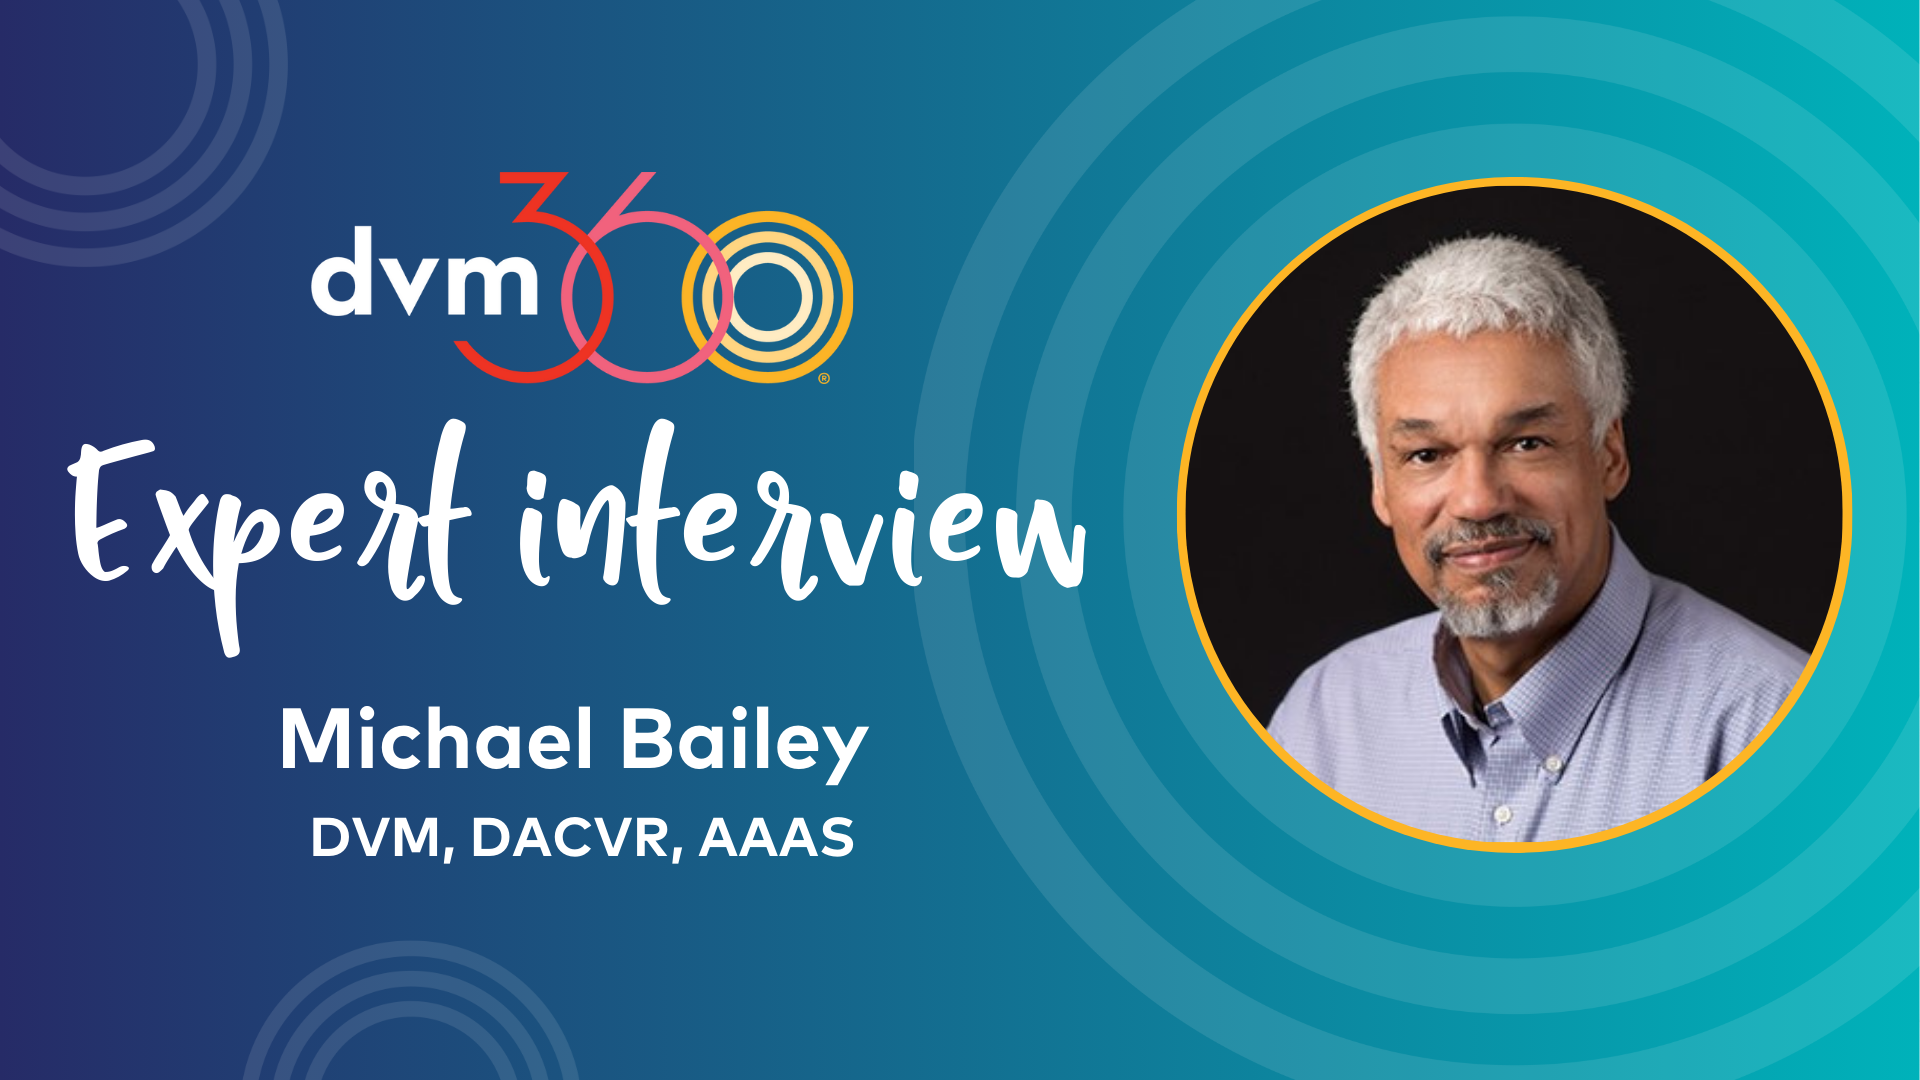 Q&A with Michael Bailey, DVM, DACVR, AAAS